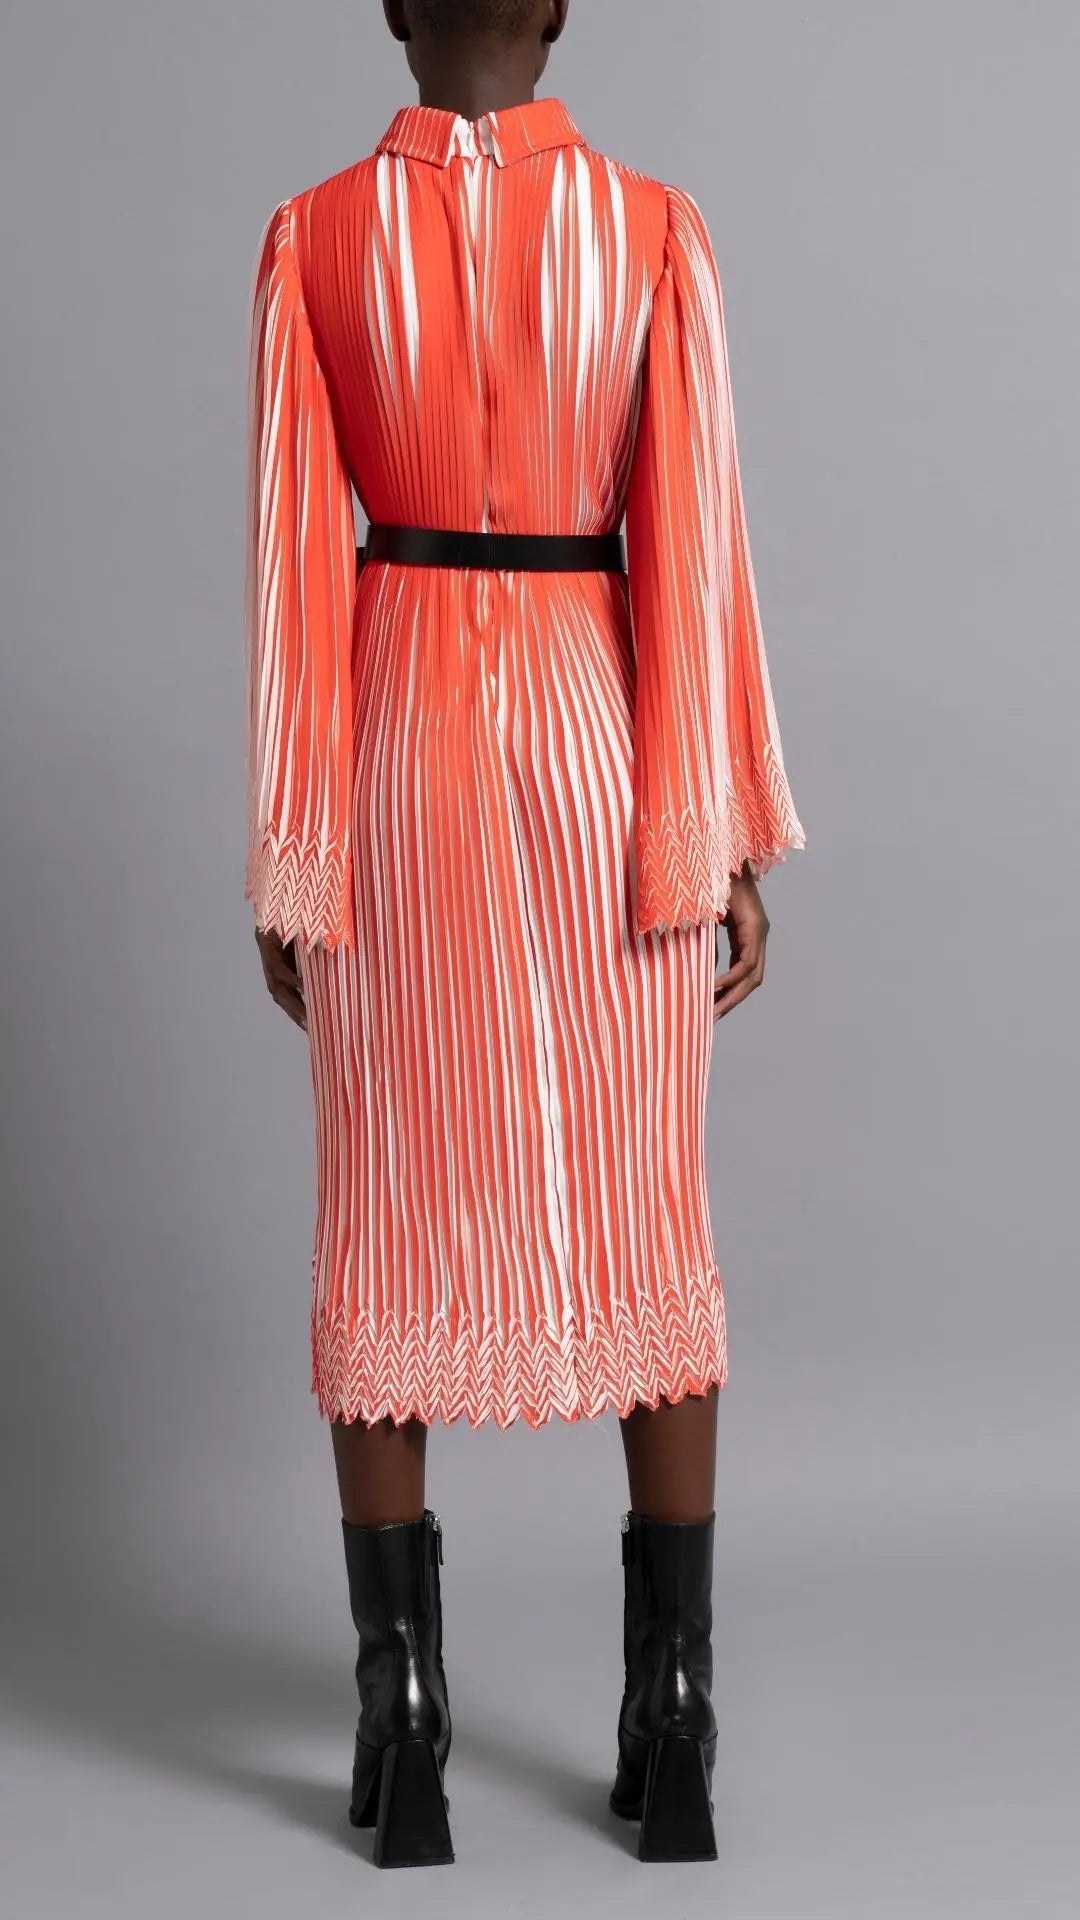 Thebe Magugu Chevron Pleated Dress. Stunning tomato red and white pleated dress with a collar, fitted waist and double chevron hem at the sleeves. It features a hidden zipper in the back. Shown on model facing back.